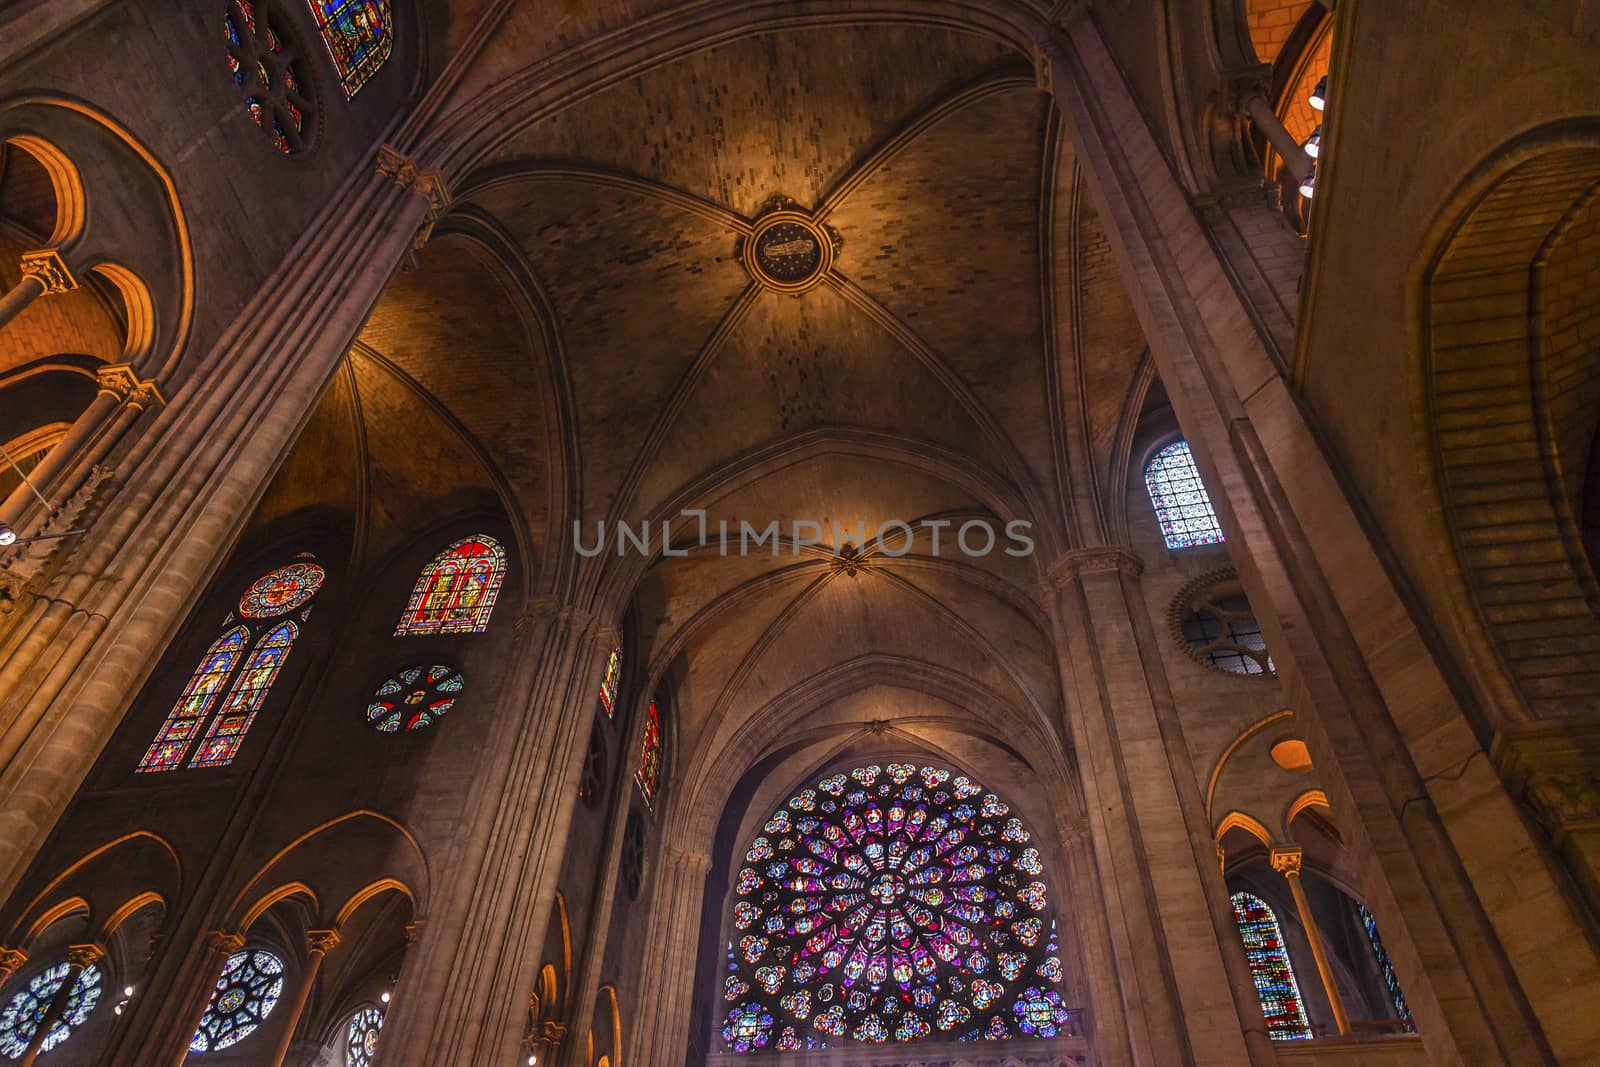 Interior Arches Gothic  Stained Glass Notre Dame Cathedral Paris France.  Notre Dame was built between 1163 and 1250 AD.  